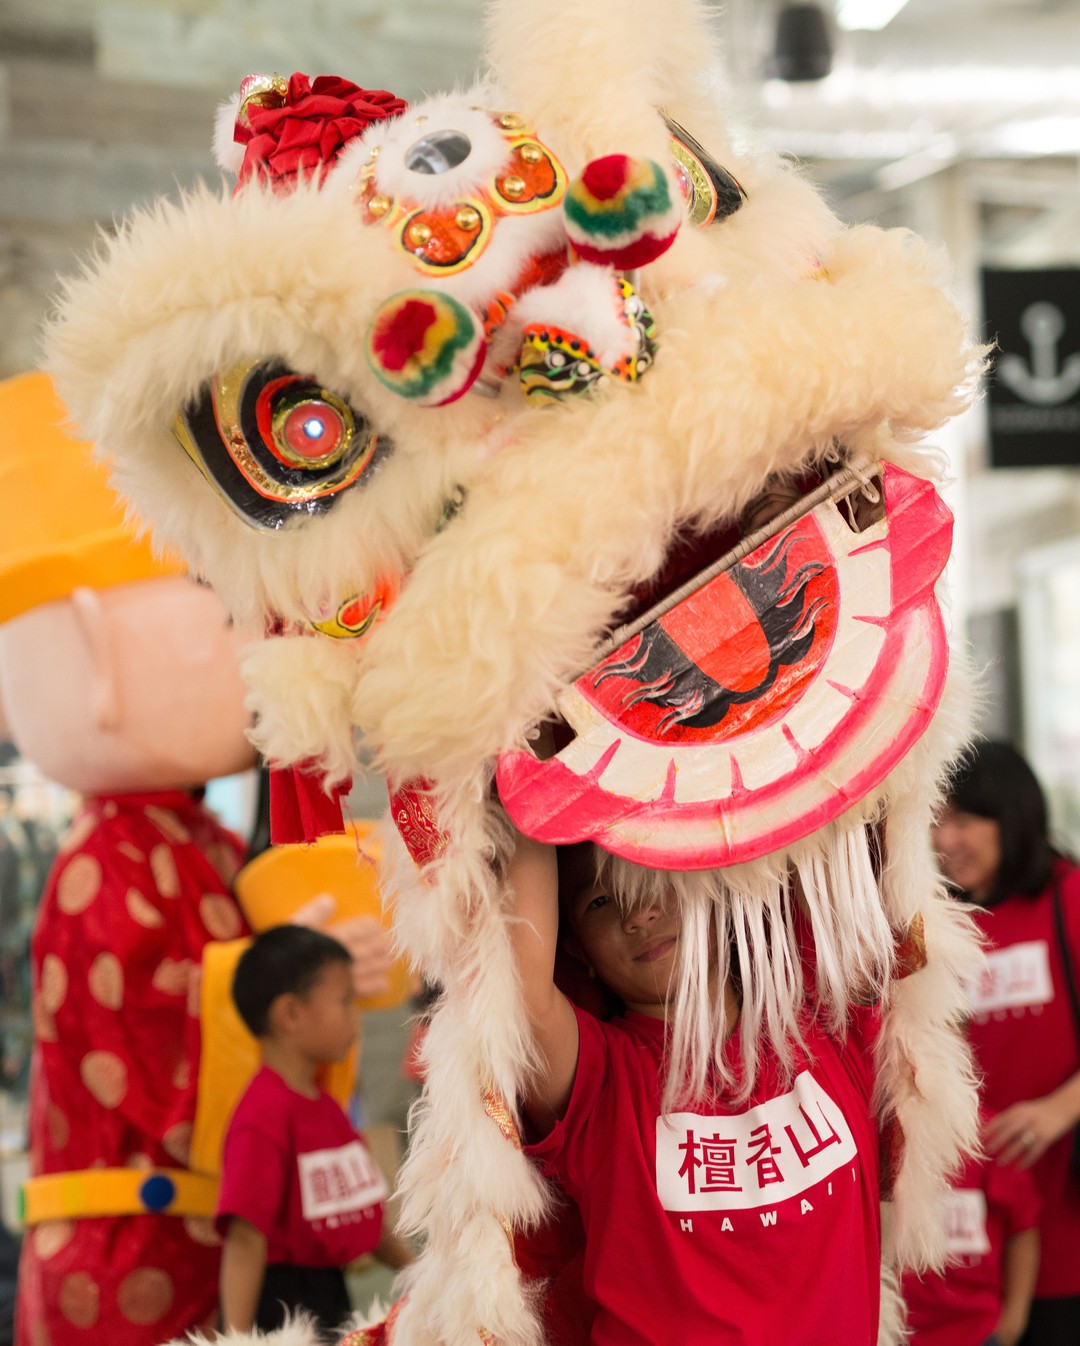 Kung Hee Fat Choy! 🧧 With Hawai‘i’s deep-seated connection to Chinese culture, you won’t find many other states celebrate as much as we do. See our link in bio to learn more about the symbolism behind Chinese New Year.